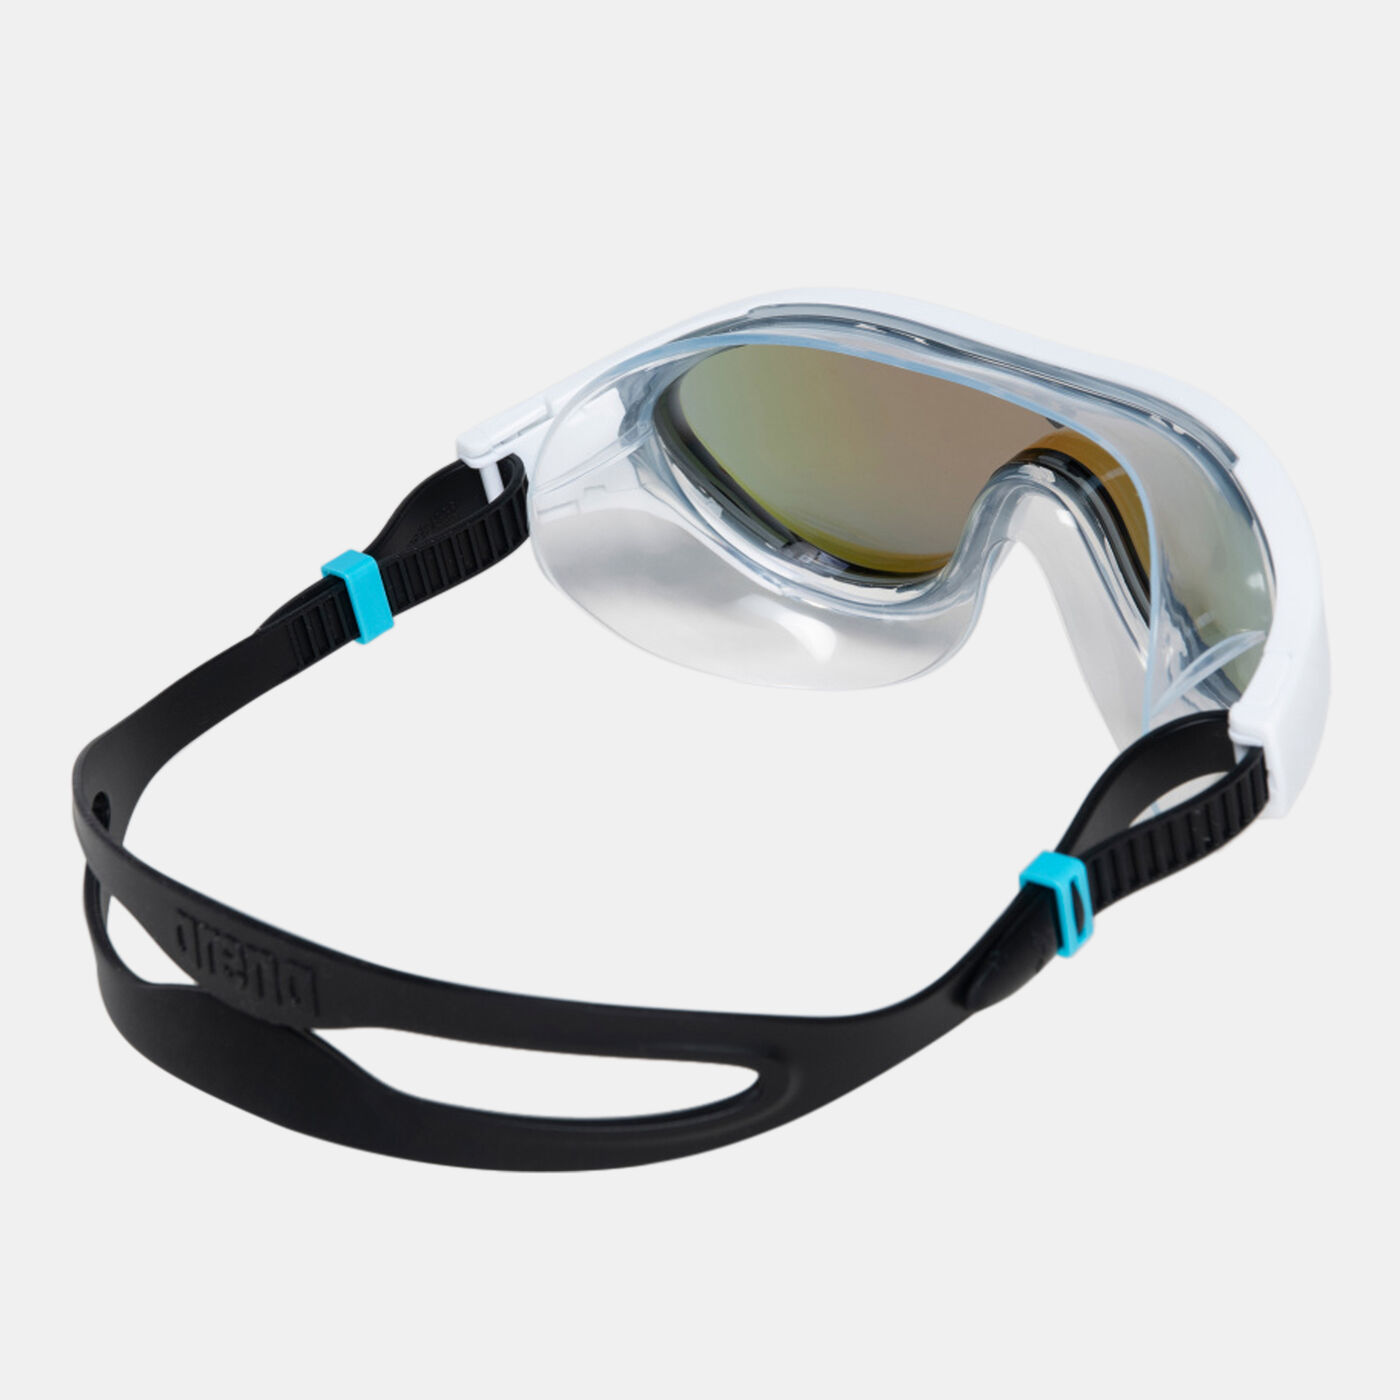 The One Mask Mirror Swimming Goggles